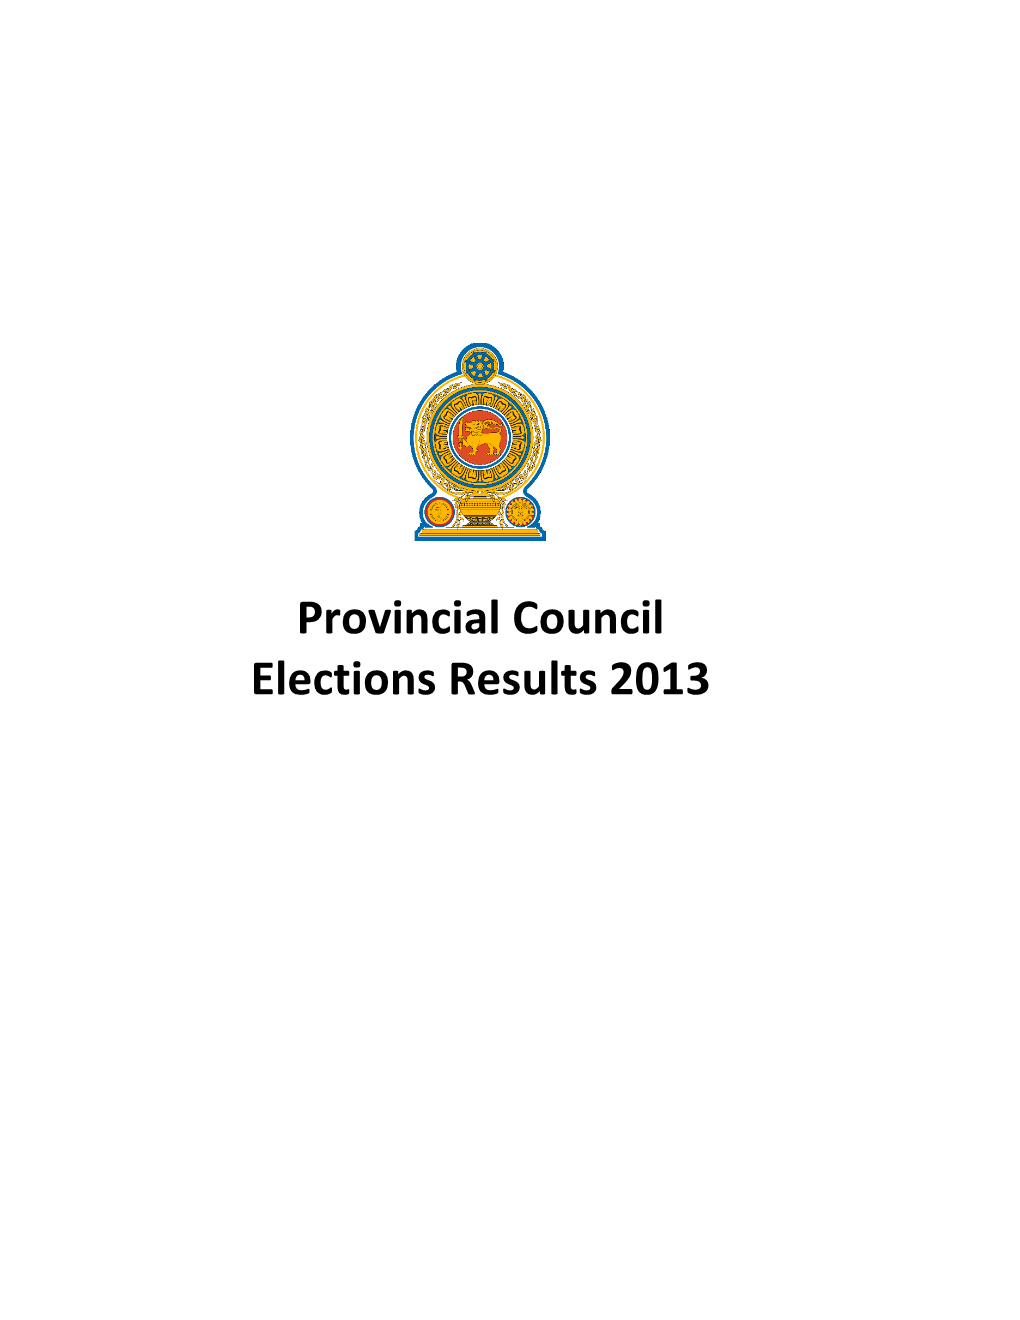 Provincial Council Elections Results 2013